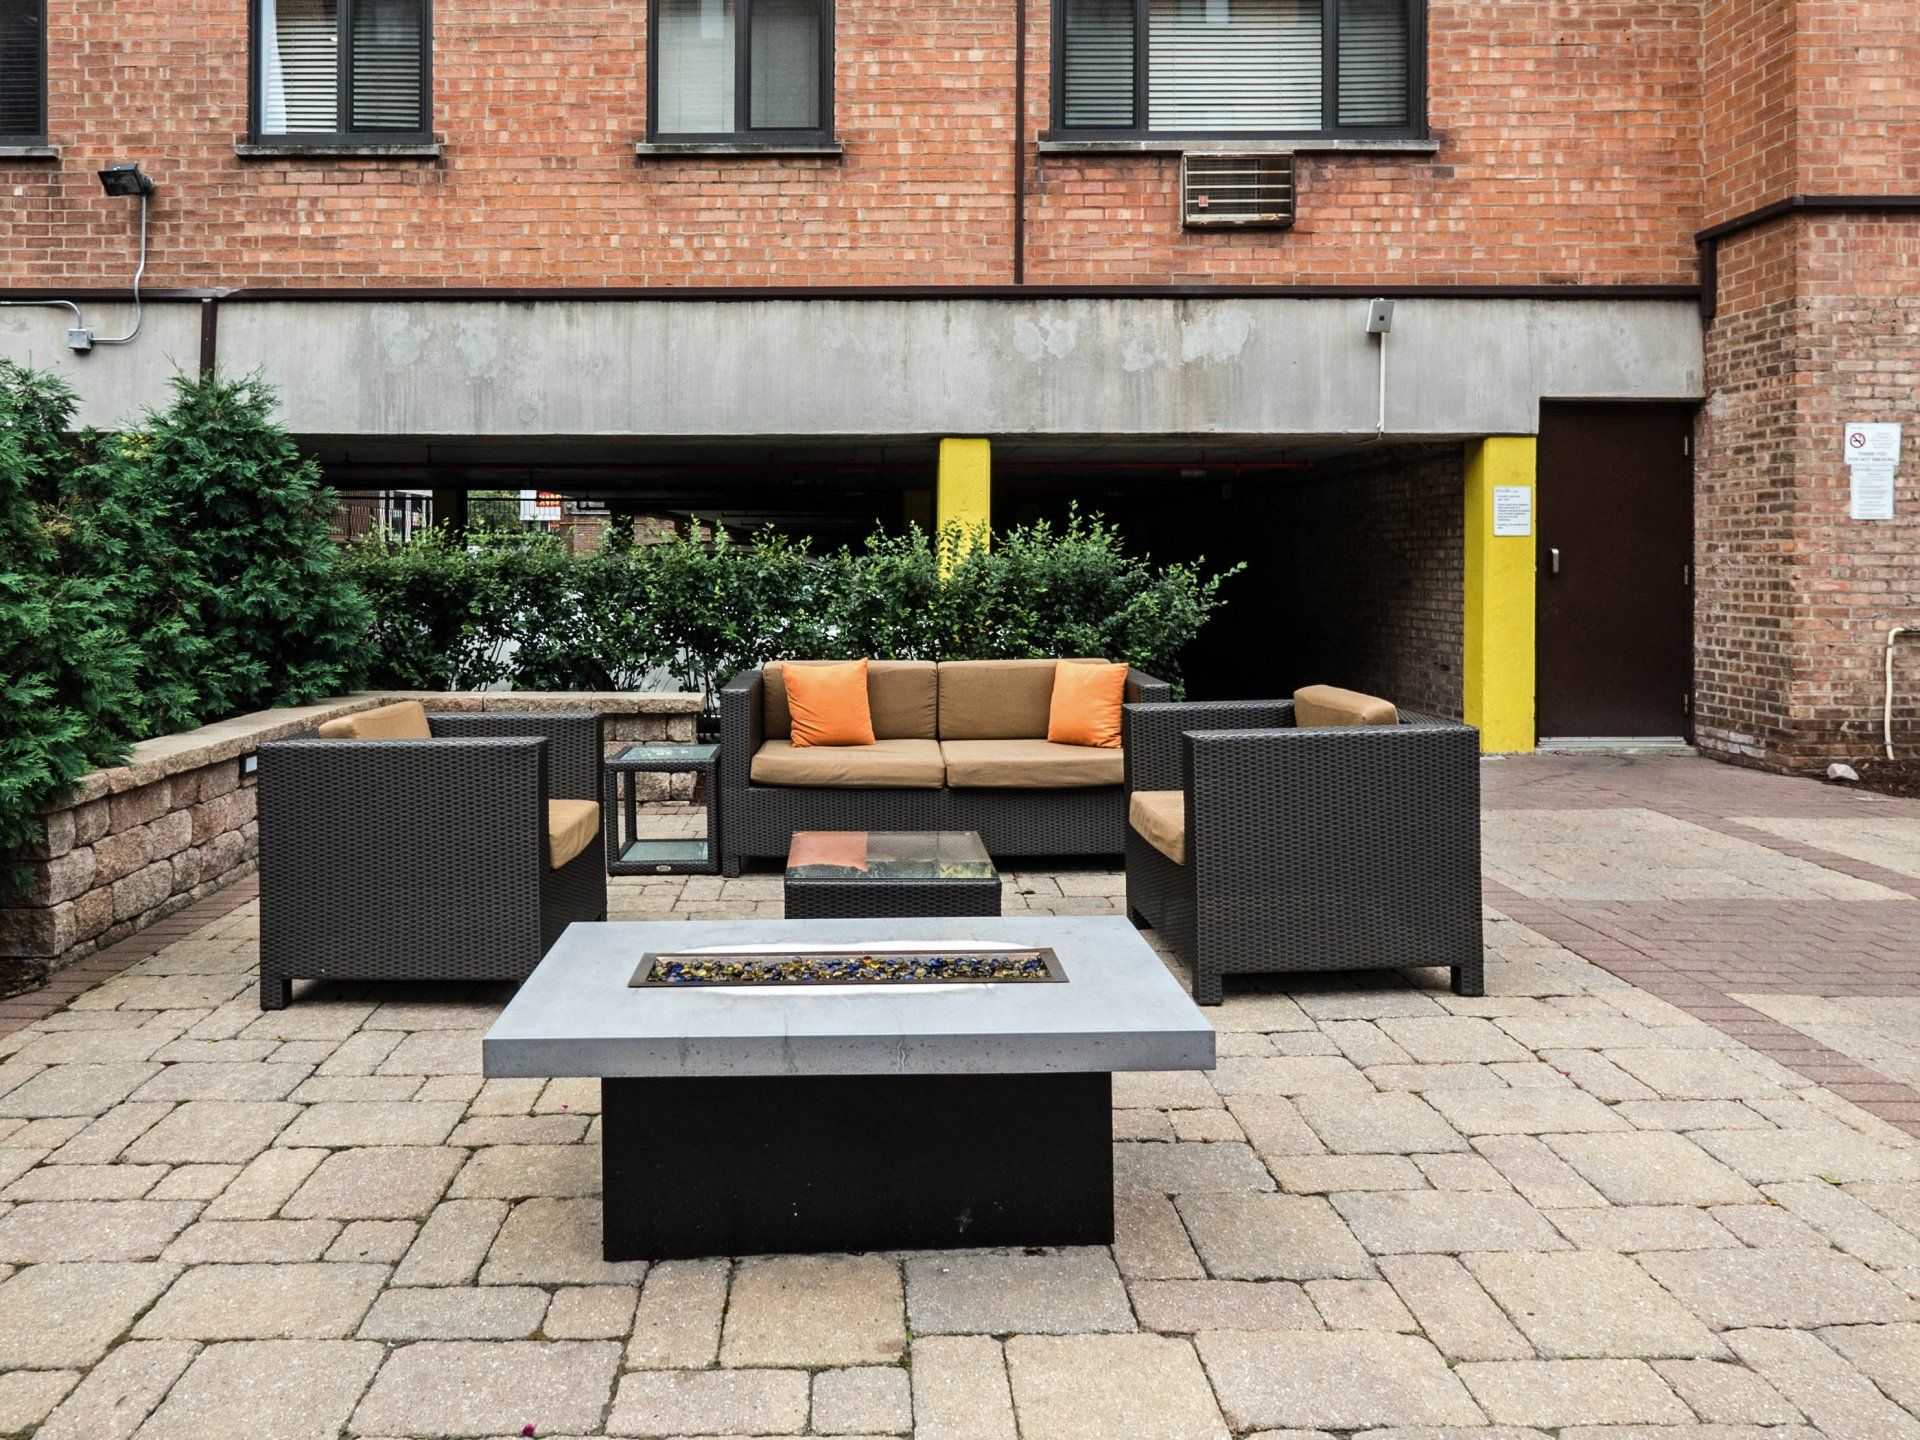 A patio with furniture and a fire pit in front of a brick building at Reside on Morse.